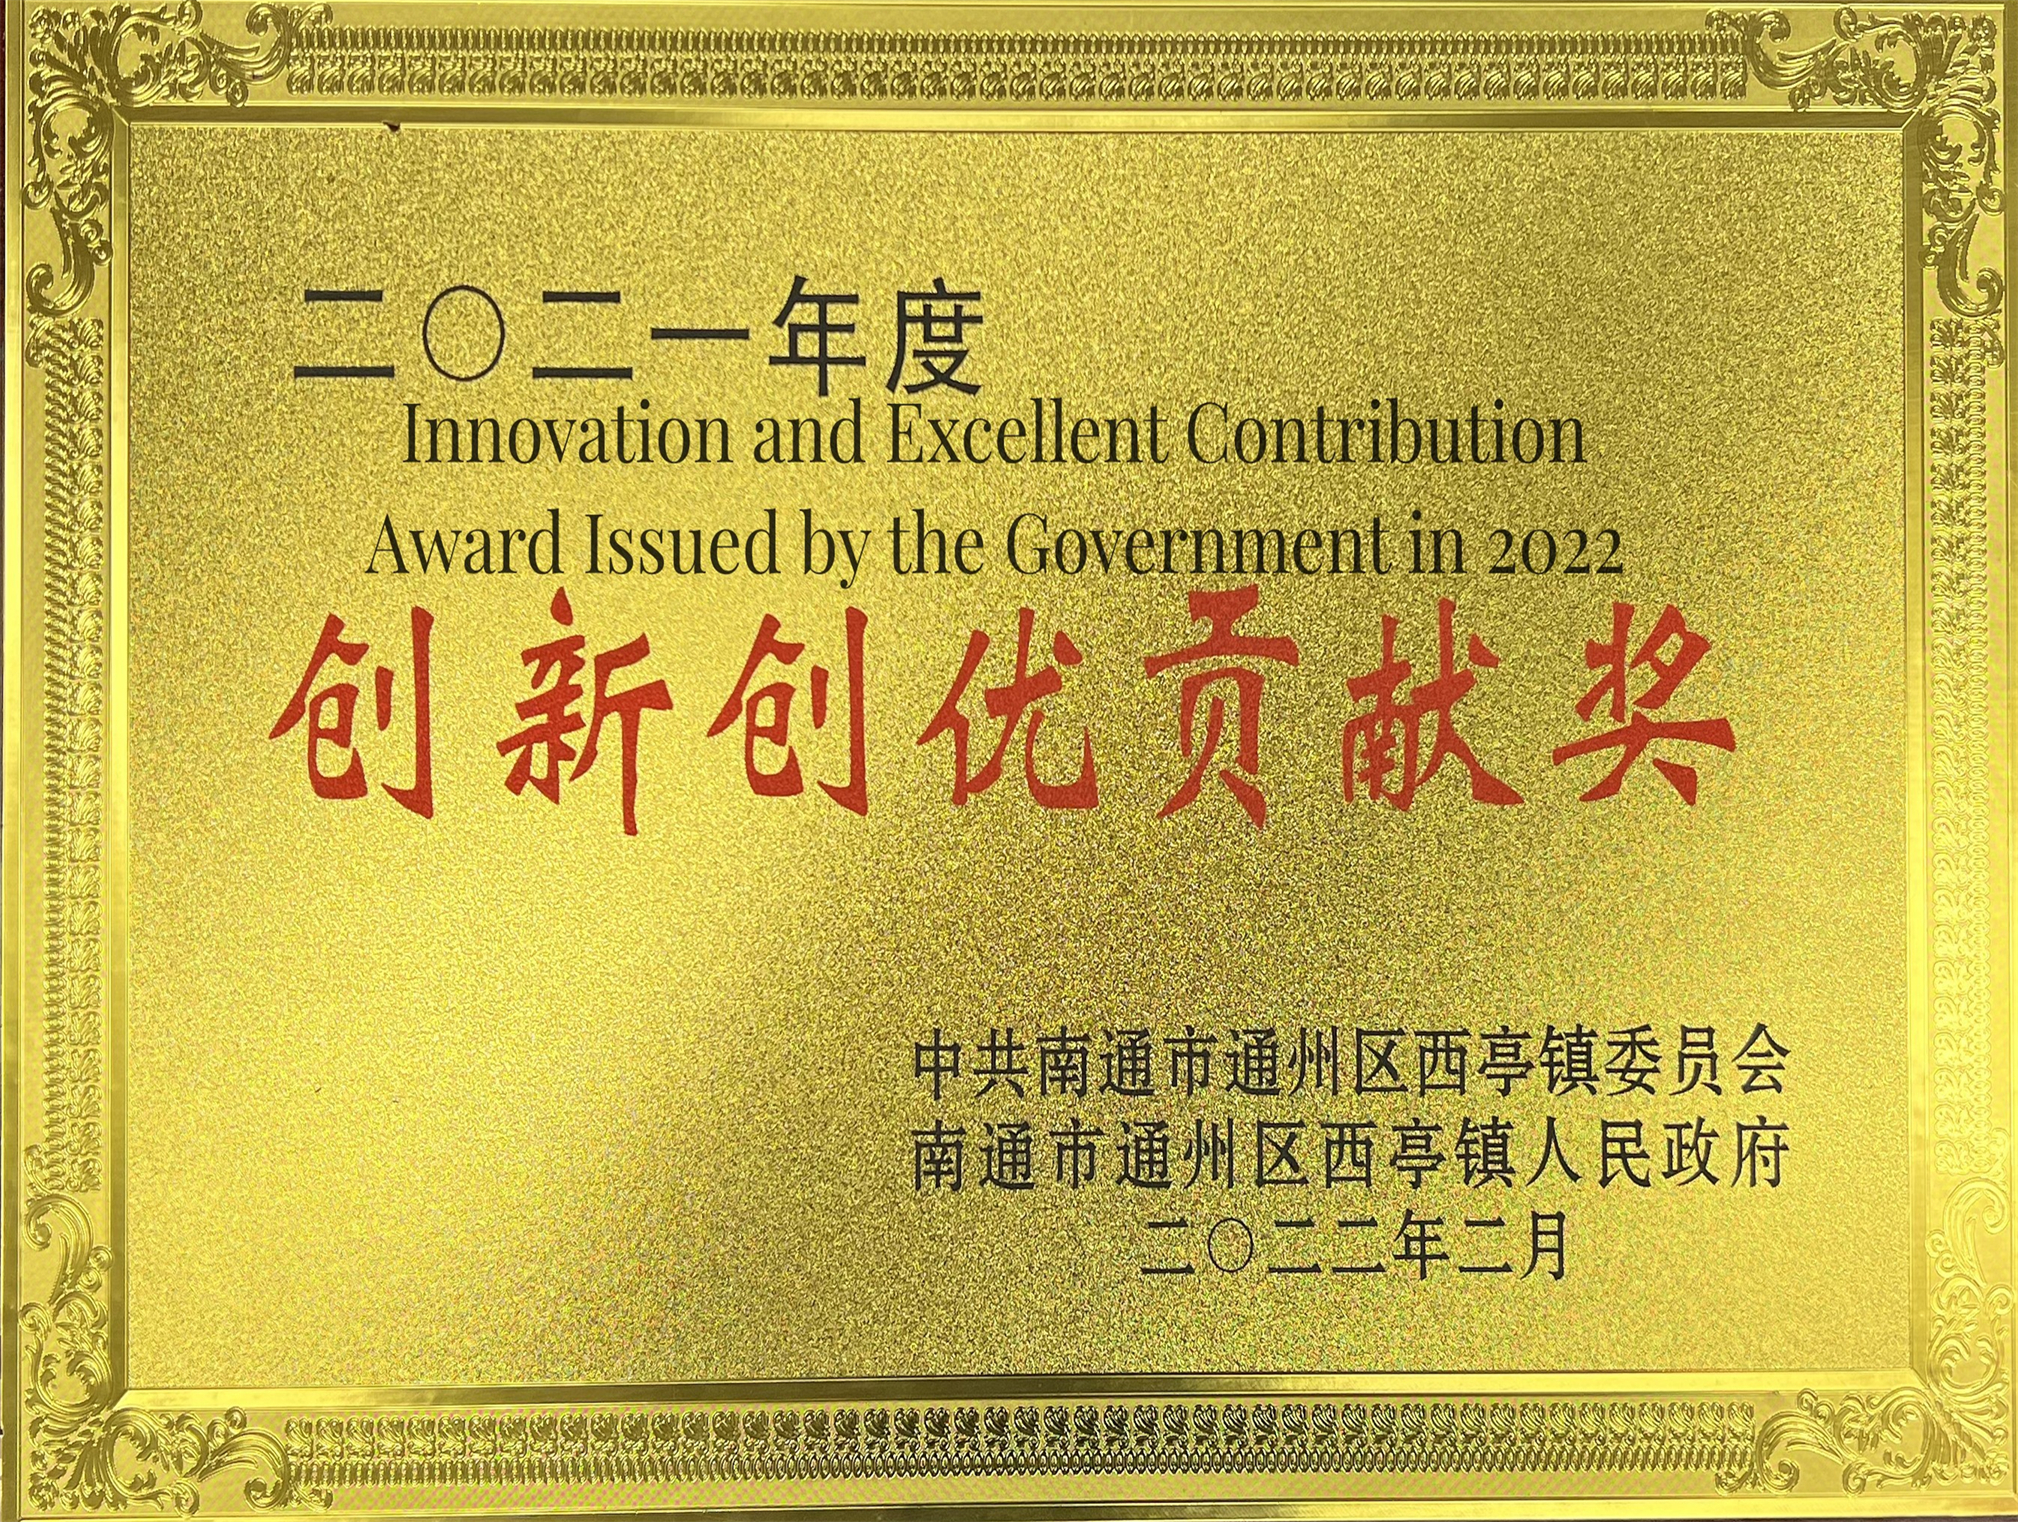 Innovation and Excellent Contribution Award 2022